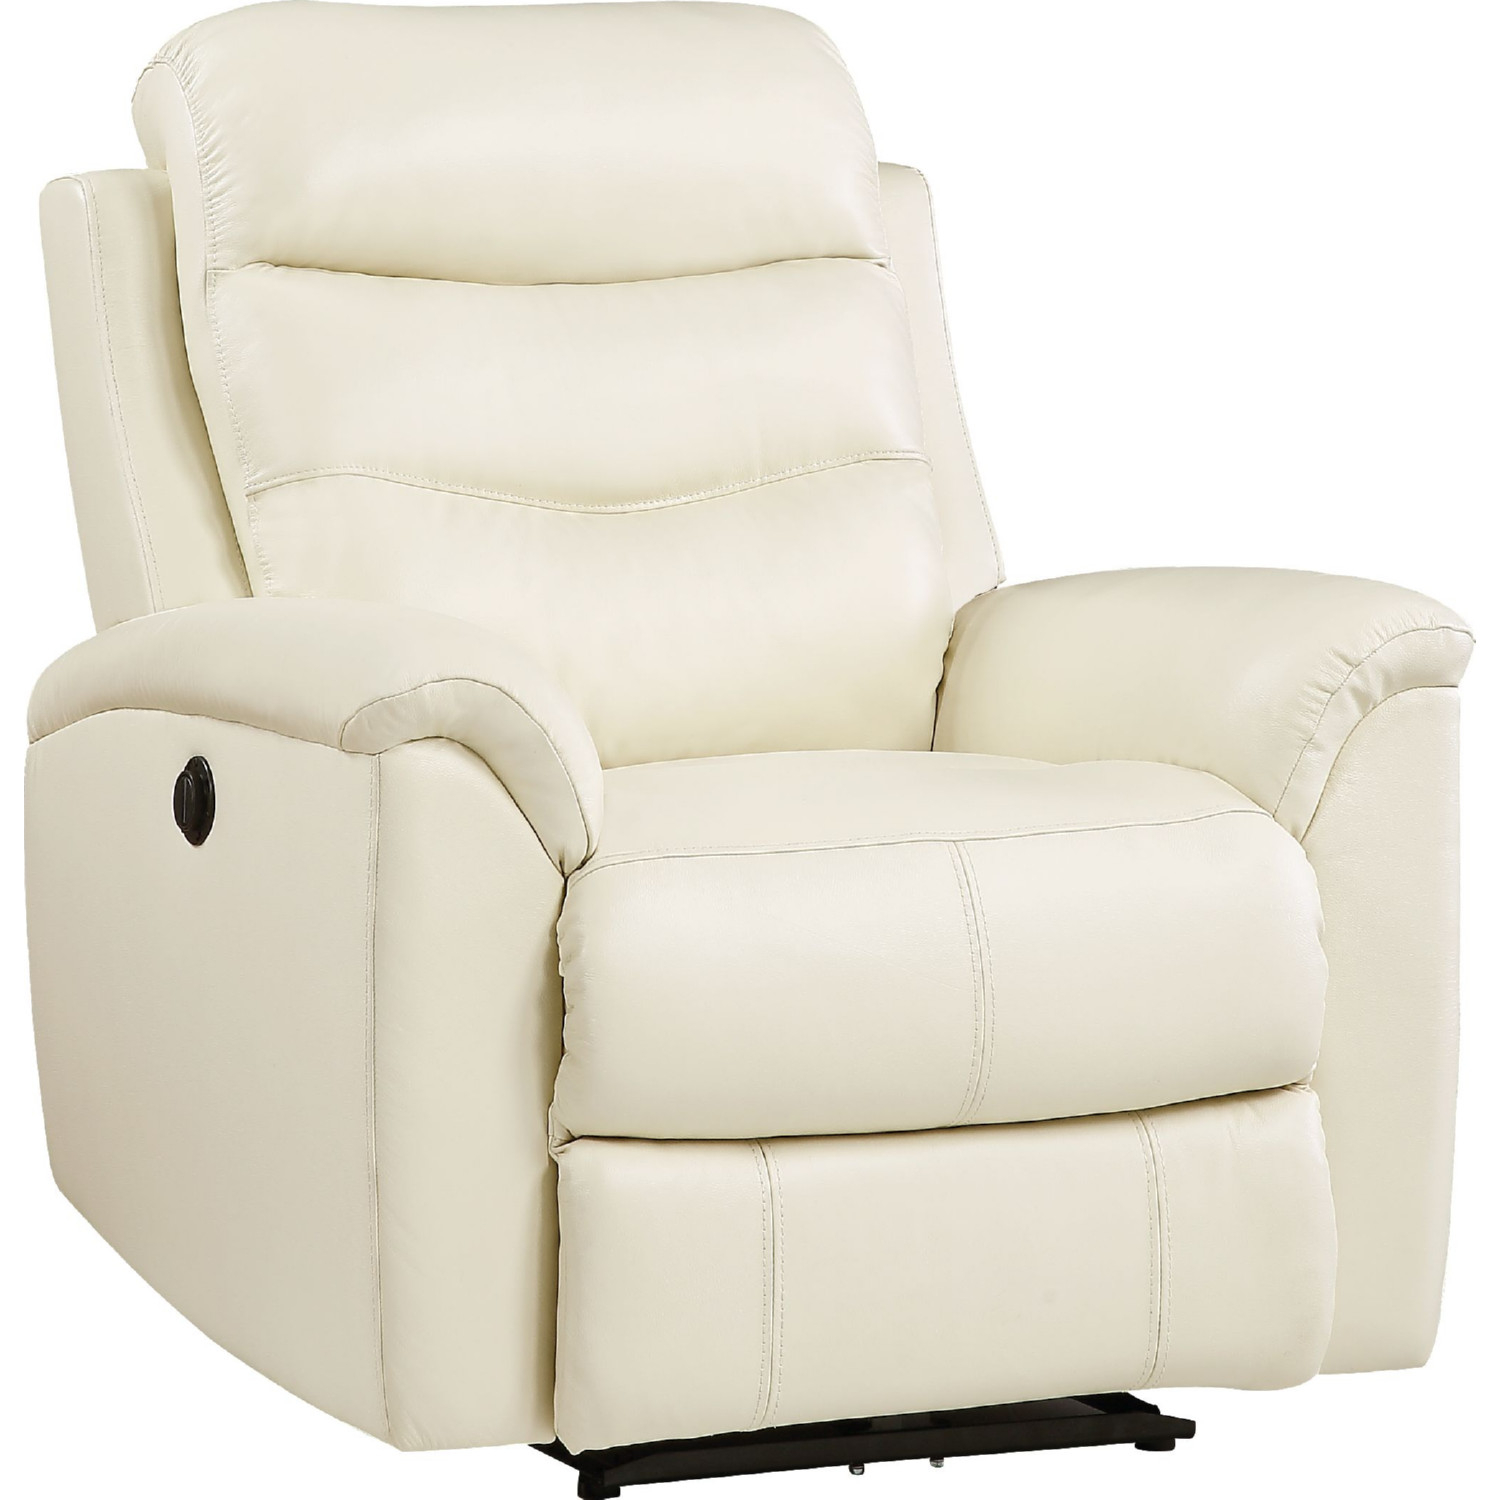 Acme 59692 Ava Power Motion Recliner in Beige Top Grain Leather